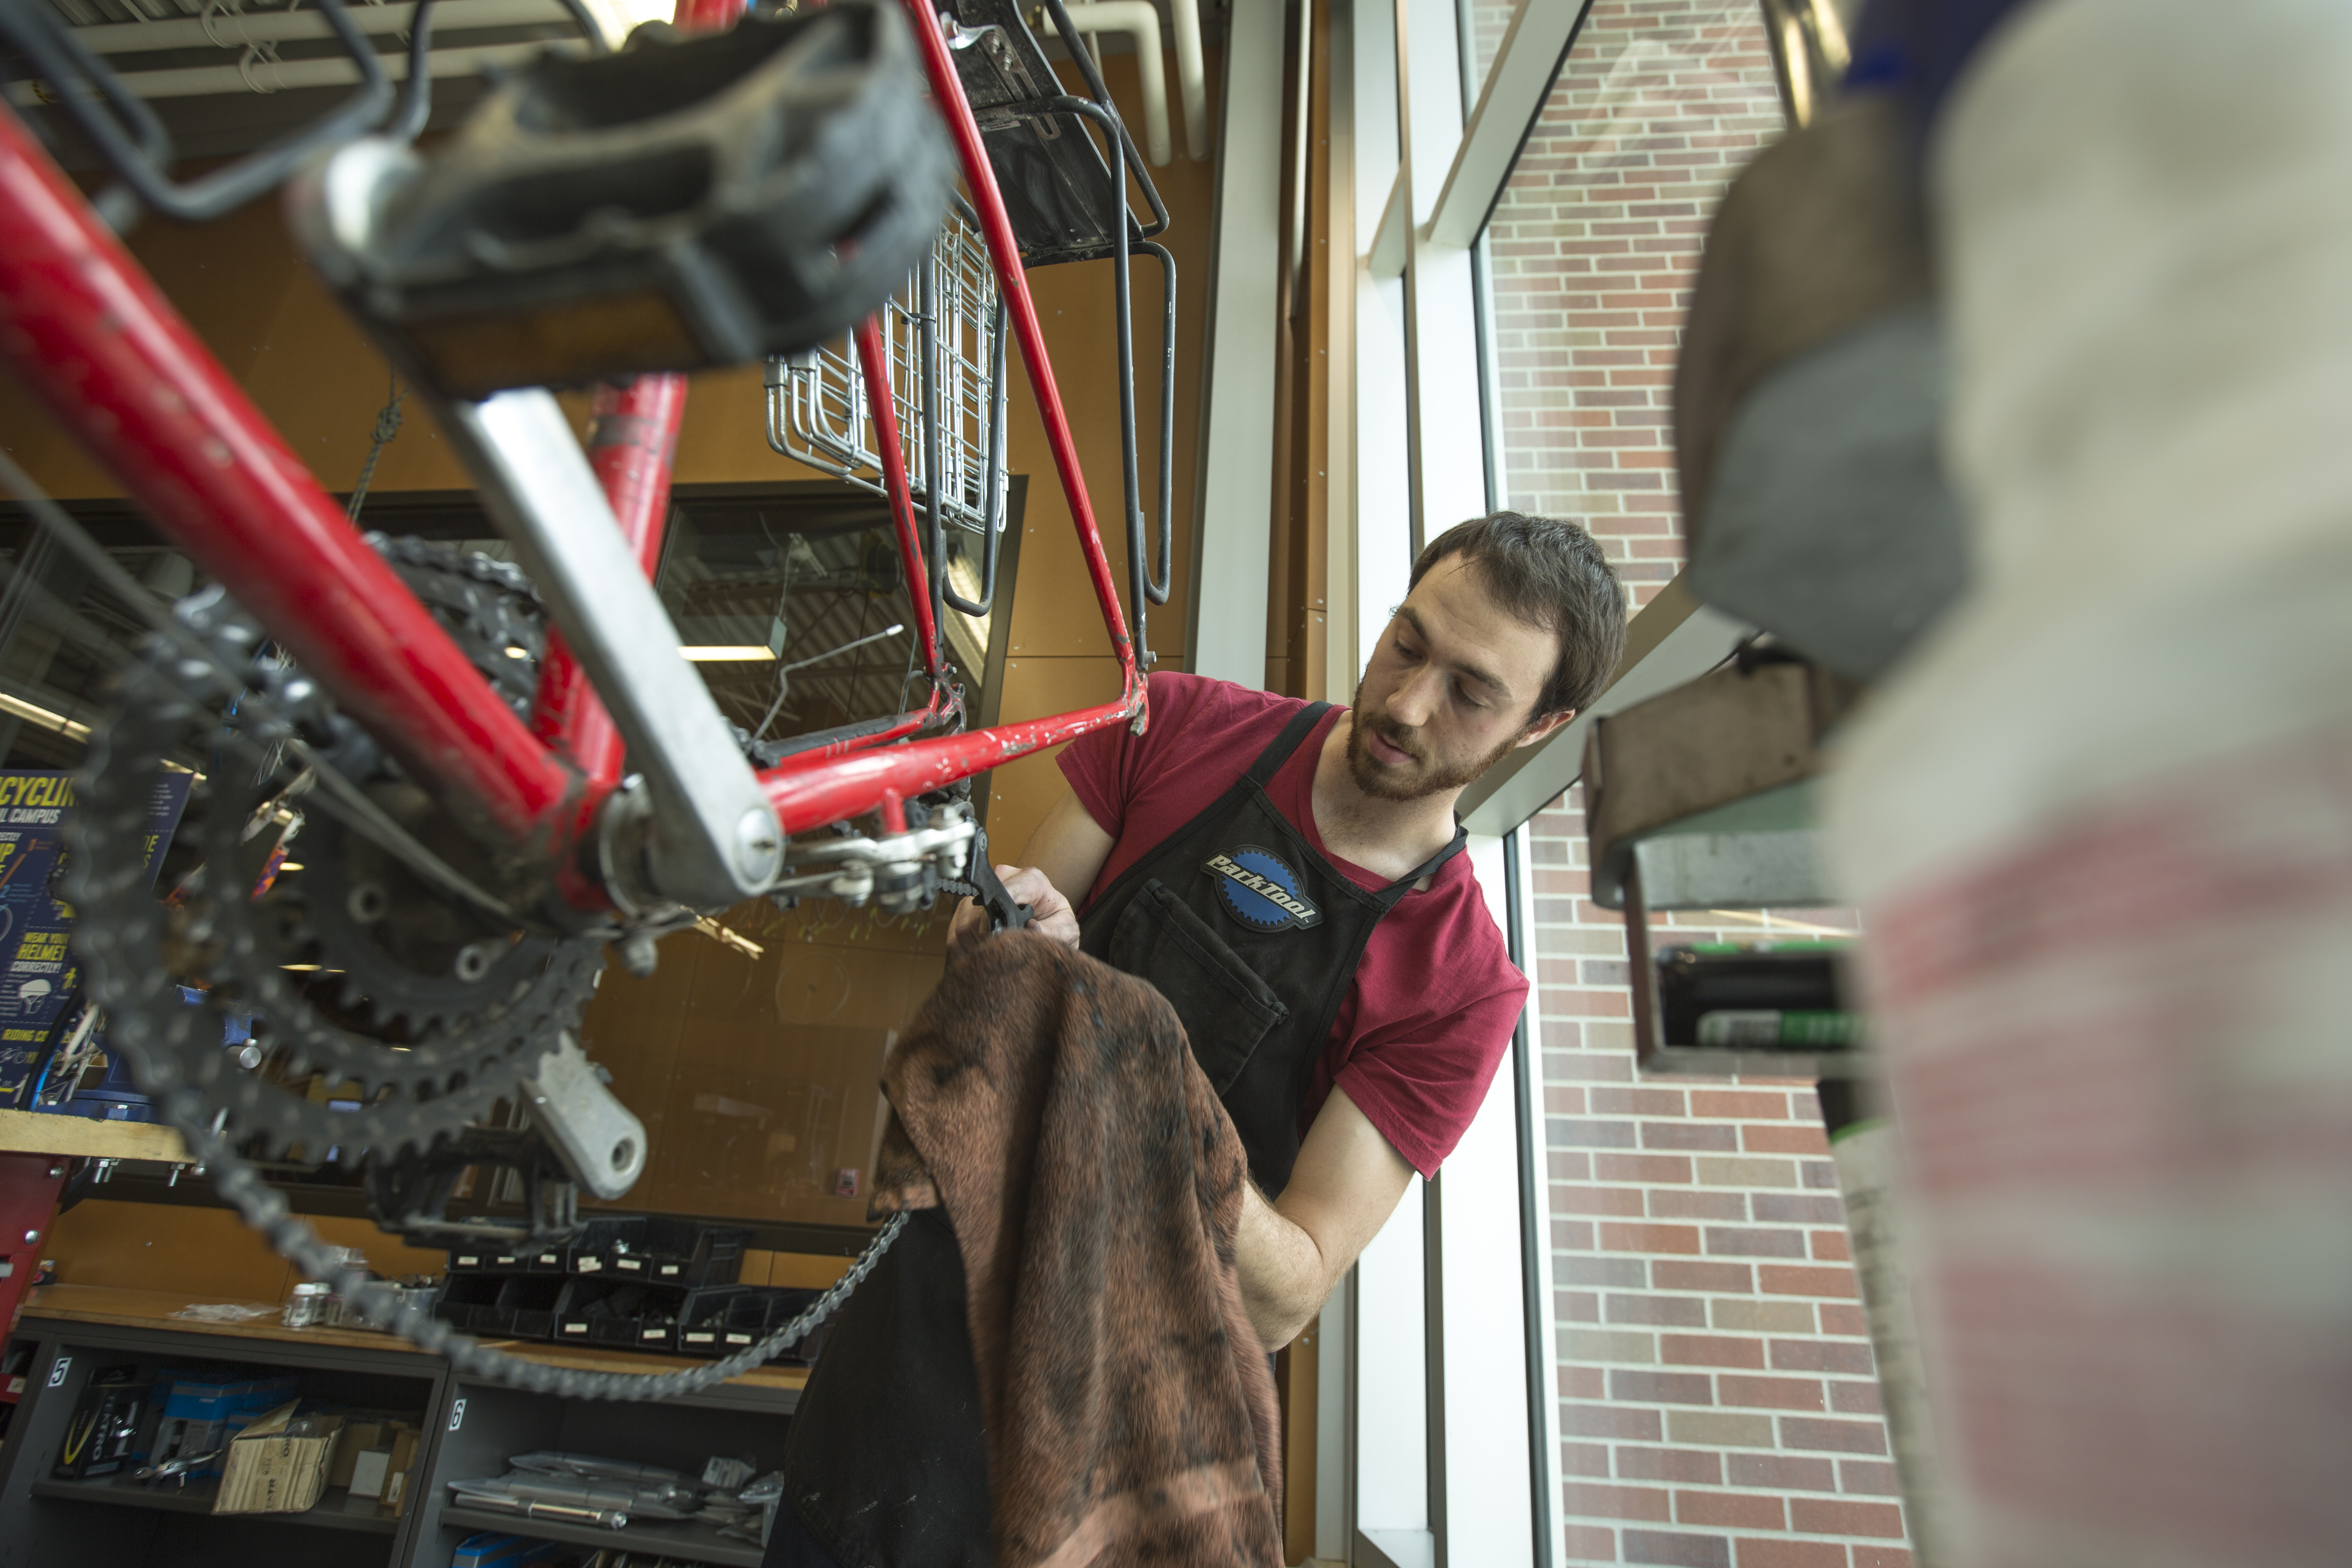 Student Paul Gebers works on a bicycle as an employee in the Outdoor Adventures Bike Shop.